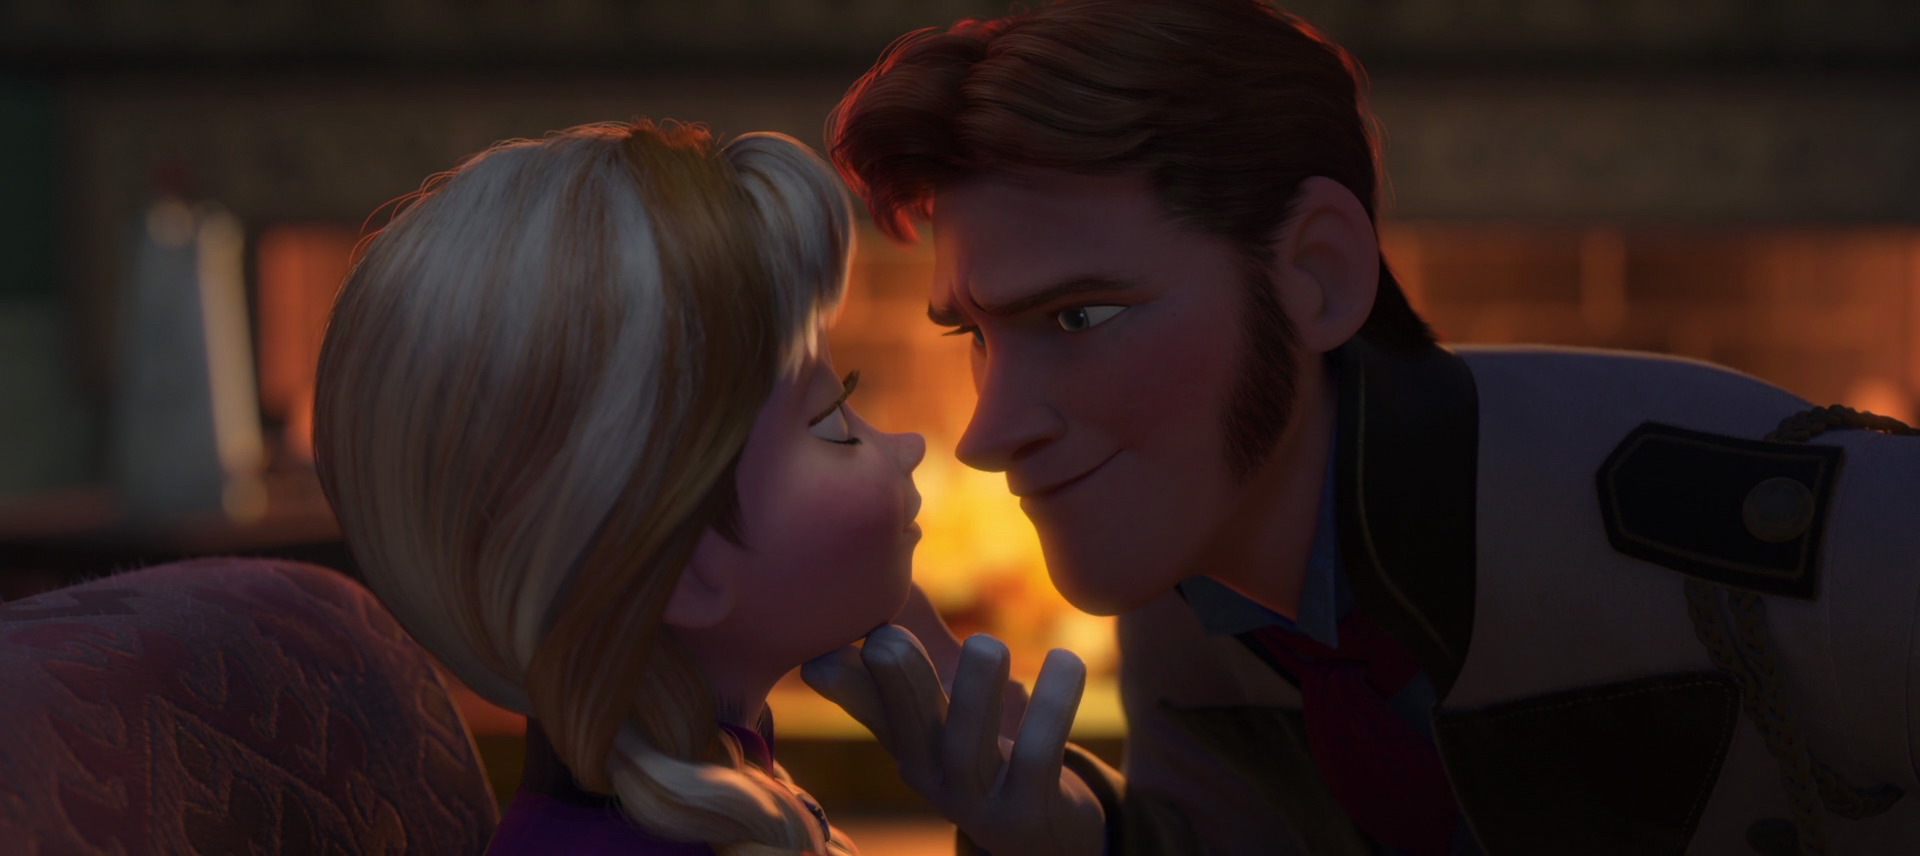 Frozen 3 Can't Repeat A Past Villain Mistake With Prince Hans - IMDb